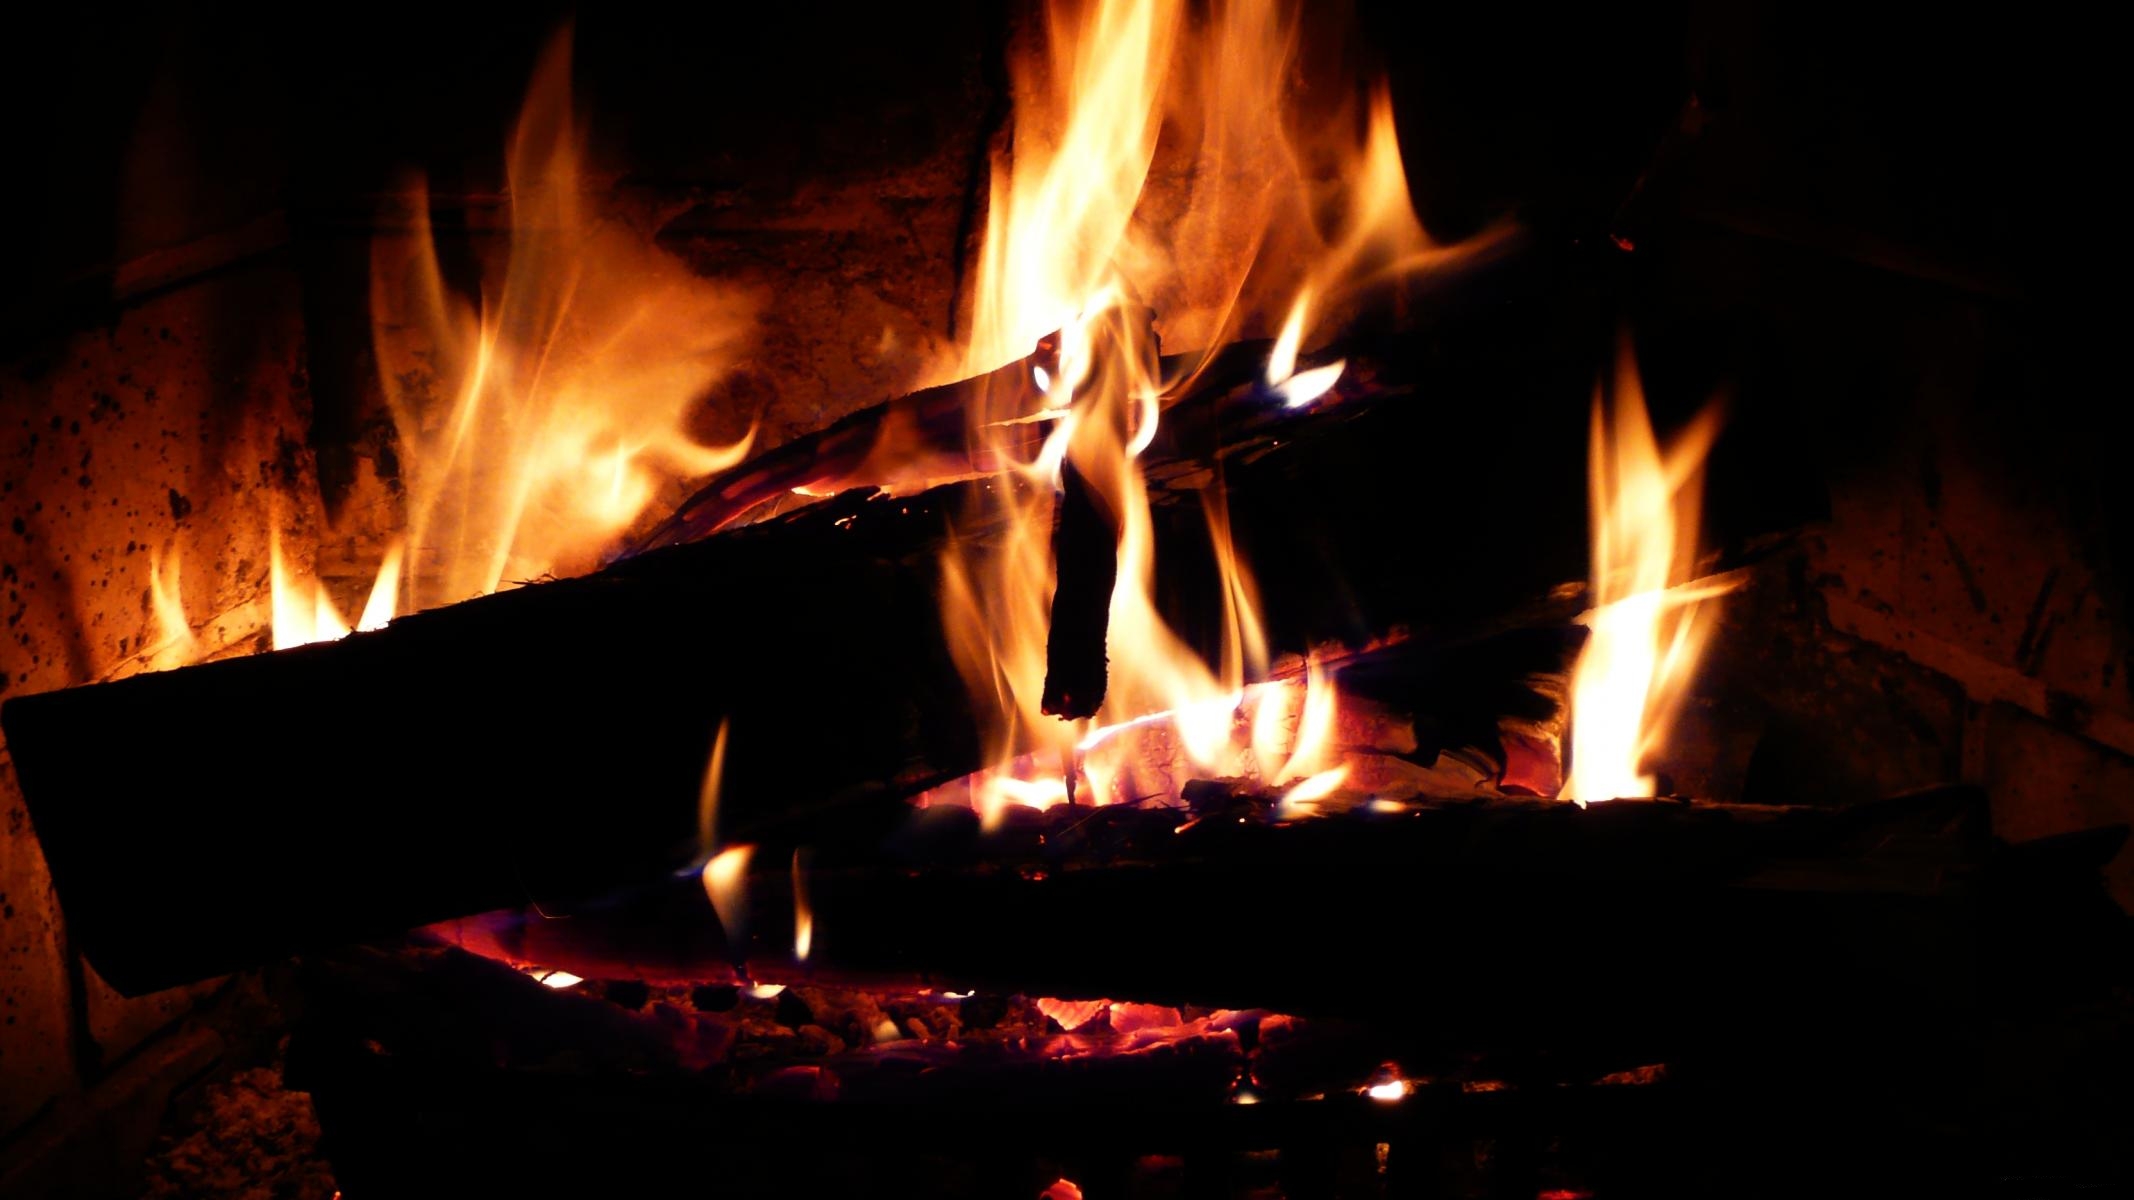 fire tumblr backgrounds